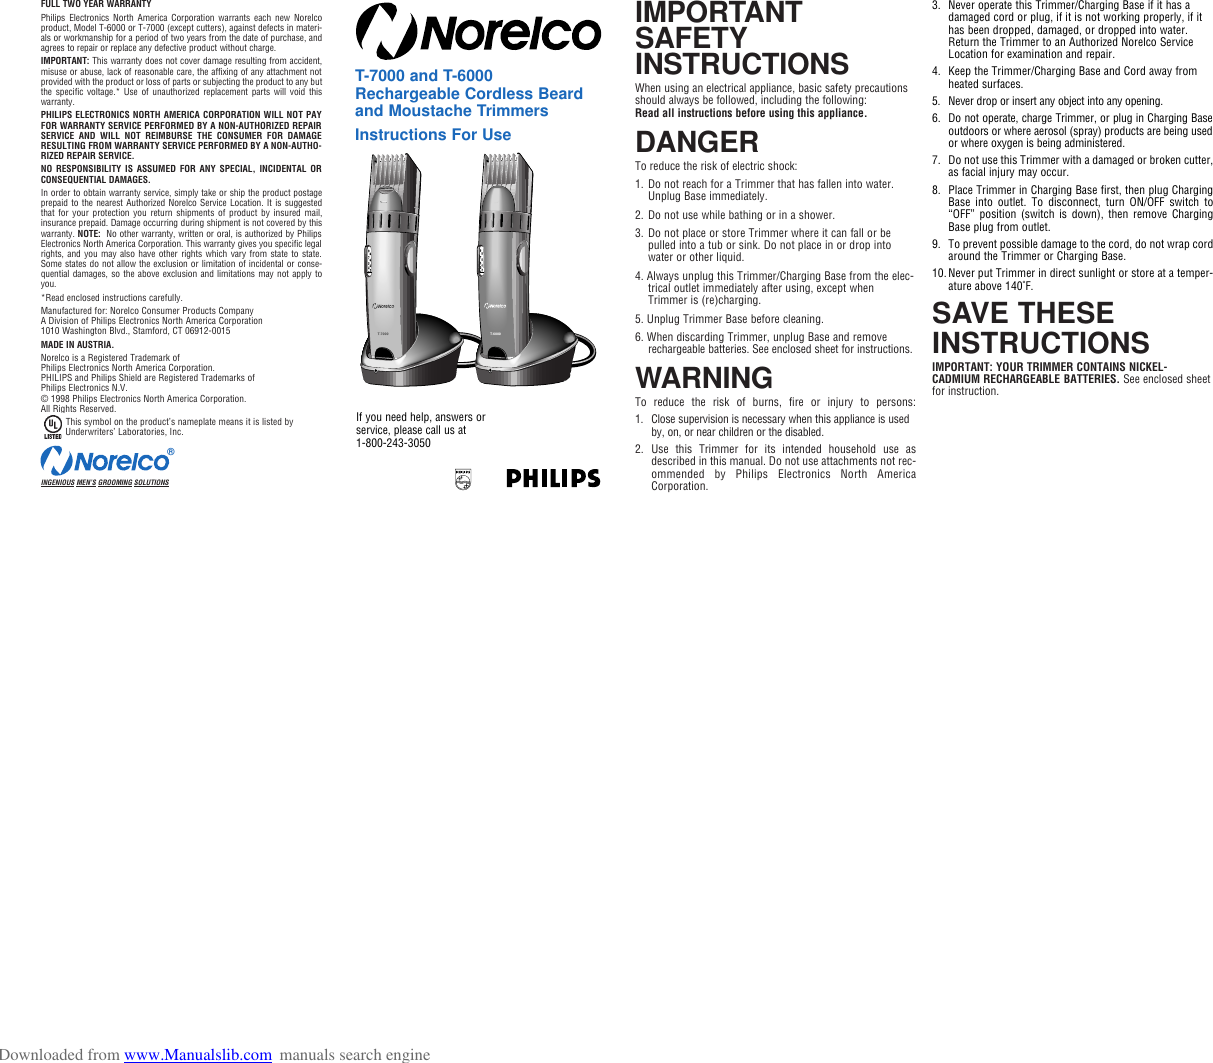 Page 1 of 4 - Philips-Norelco Philips-Norelco-Electric-Shaver-T-6000-Users-Manual- ManualsLib - Makes It Easy To Find Manuals Online!  Philips-norelco-electric-shaver-t-6000-users-manual